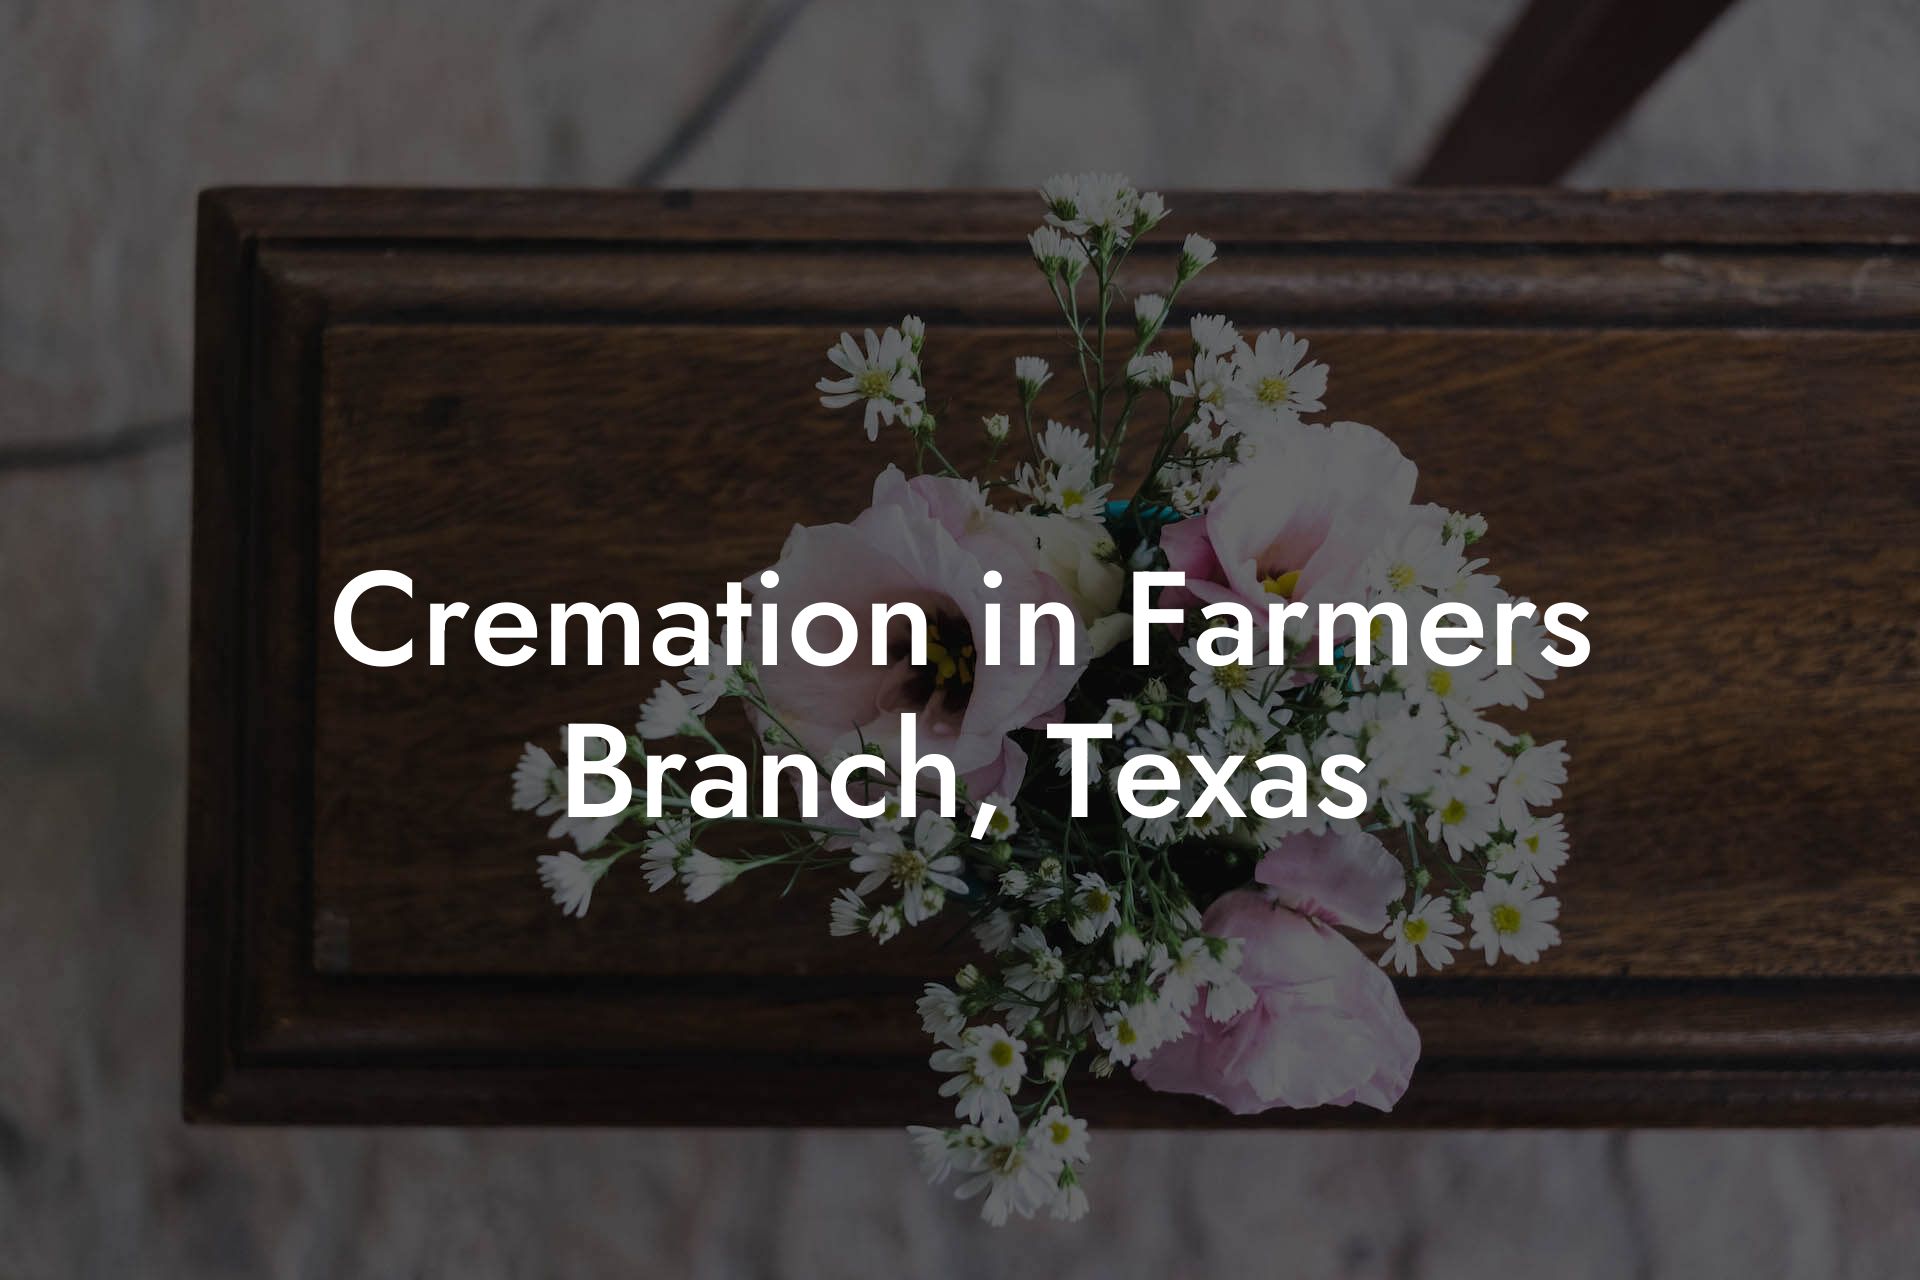 Cremation in Farmers Branch, Texas